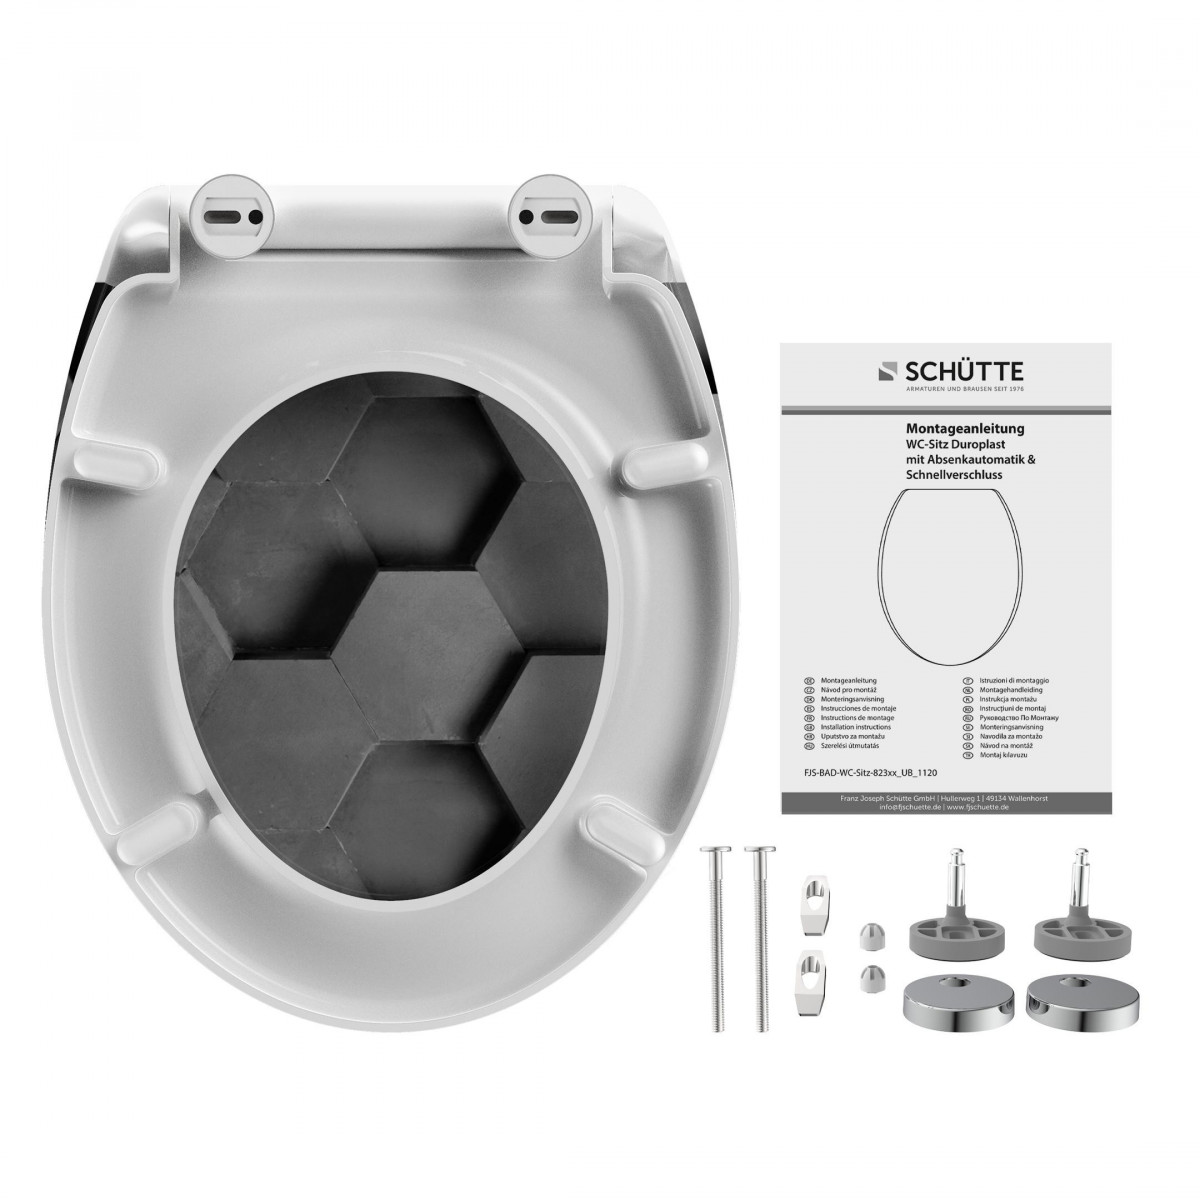 Duroplast Toilet Seat GREY HEXAGONS with Soft Close and Quick Release